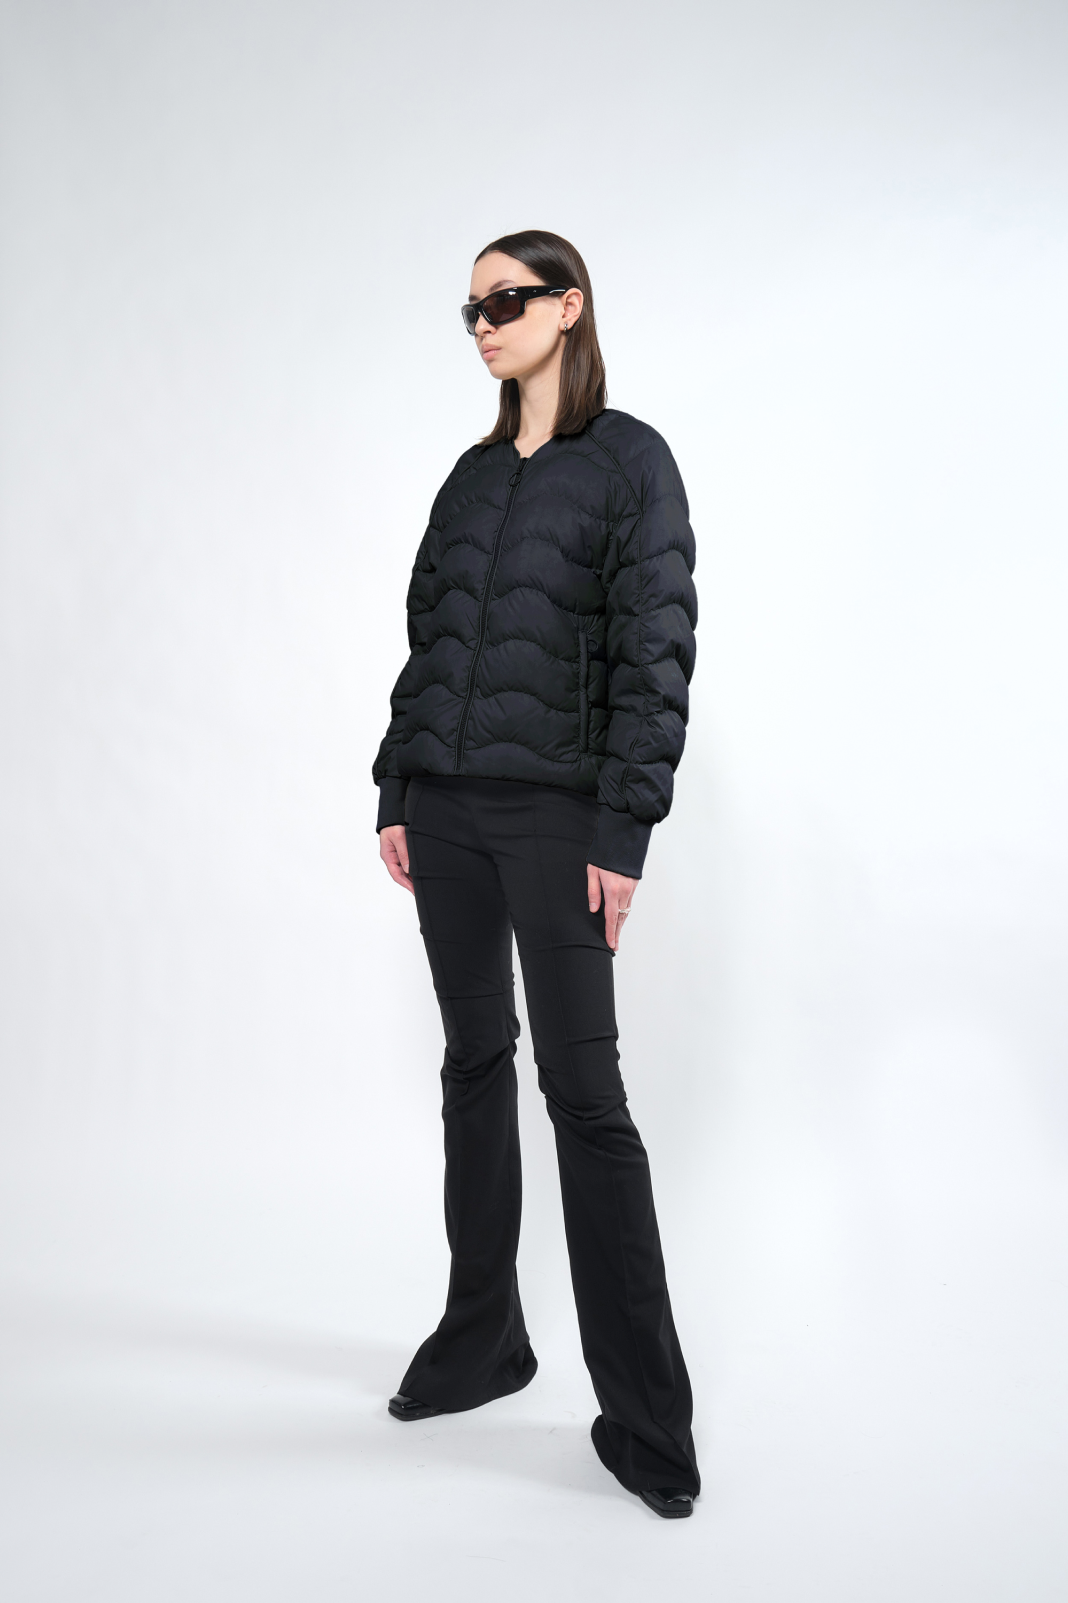  Re:Down® Black Light Puffer Jacket - Adhere To  - 1